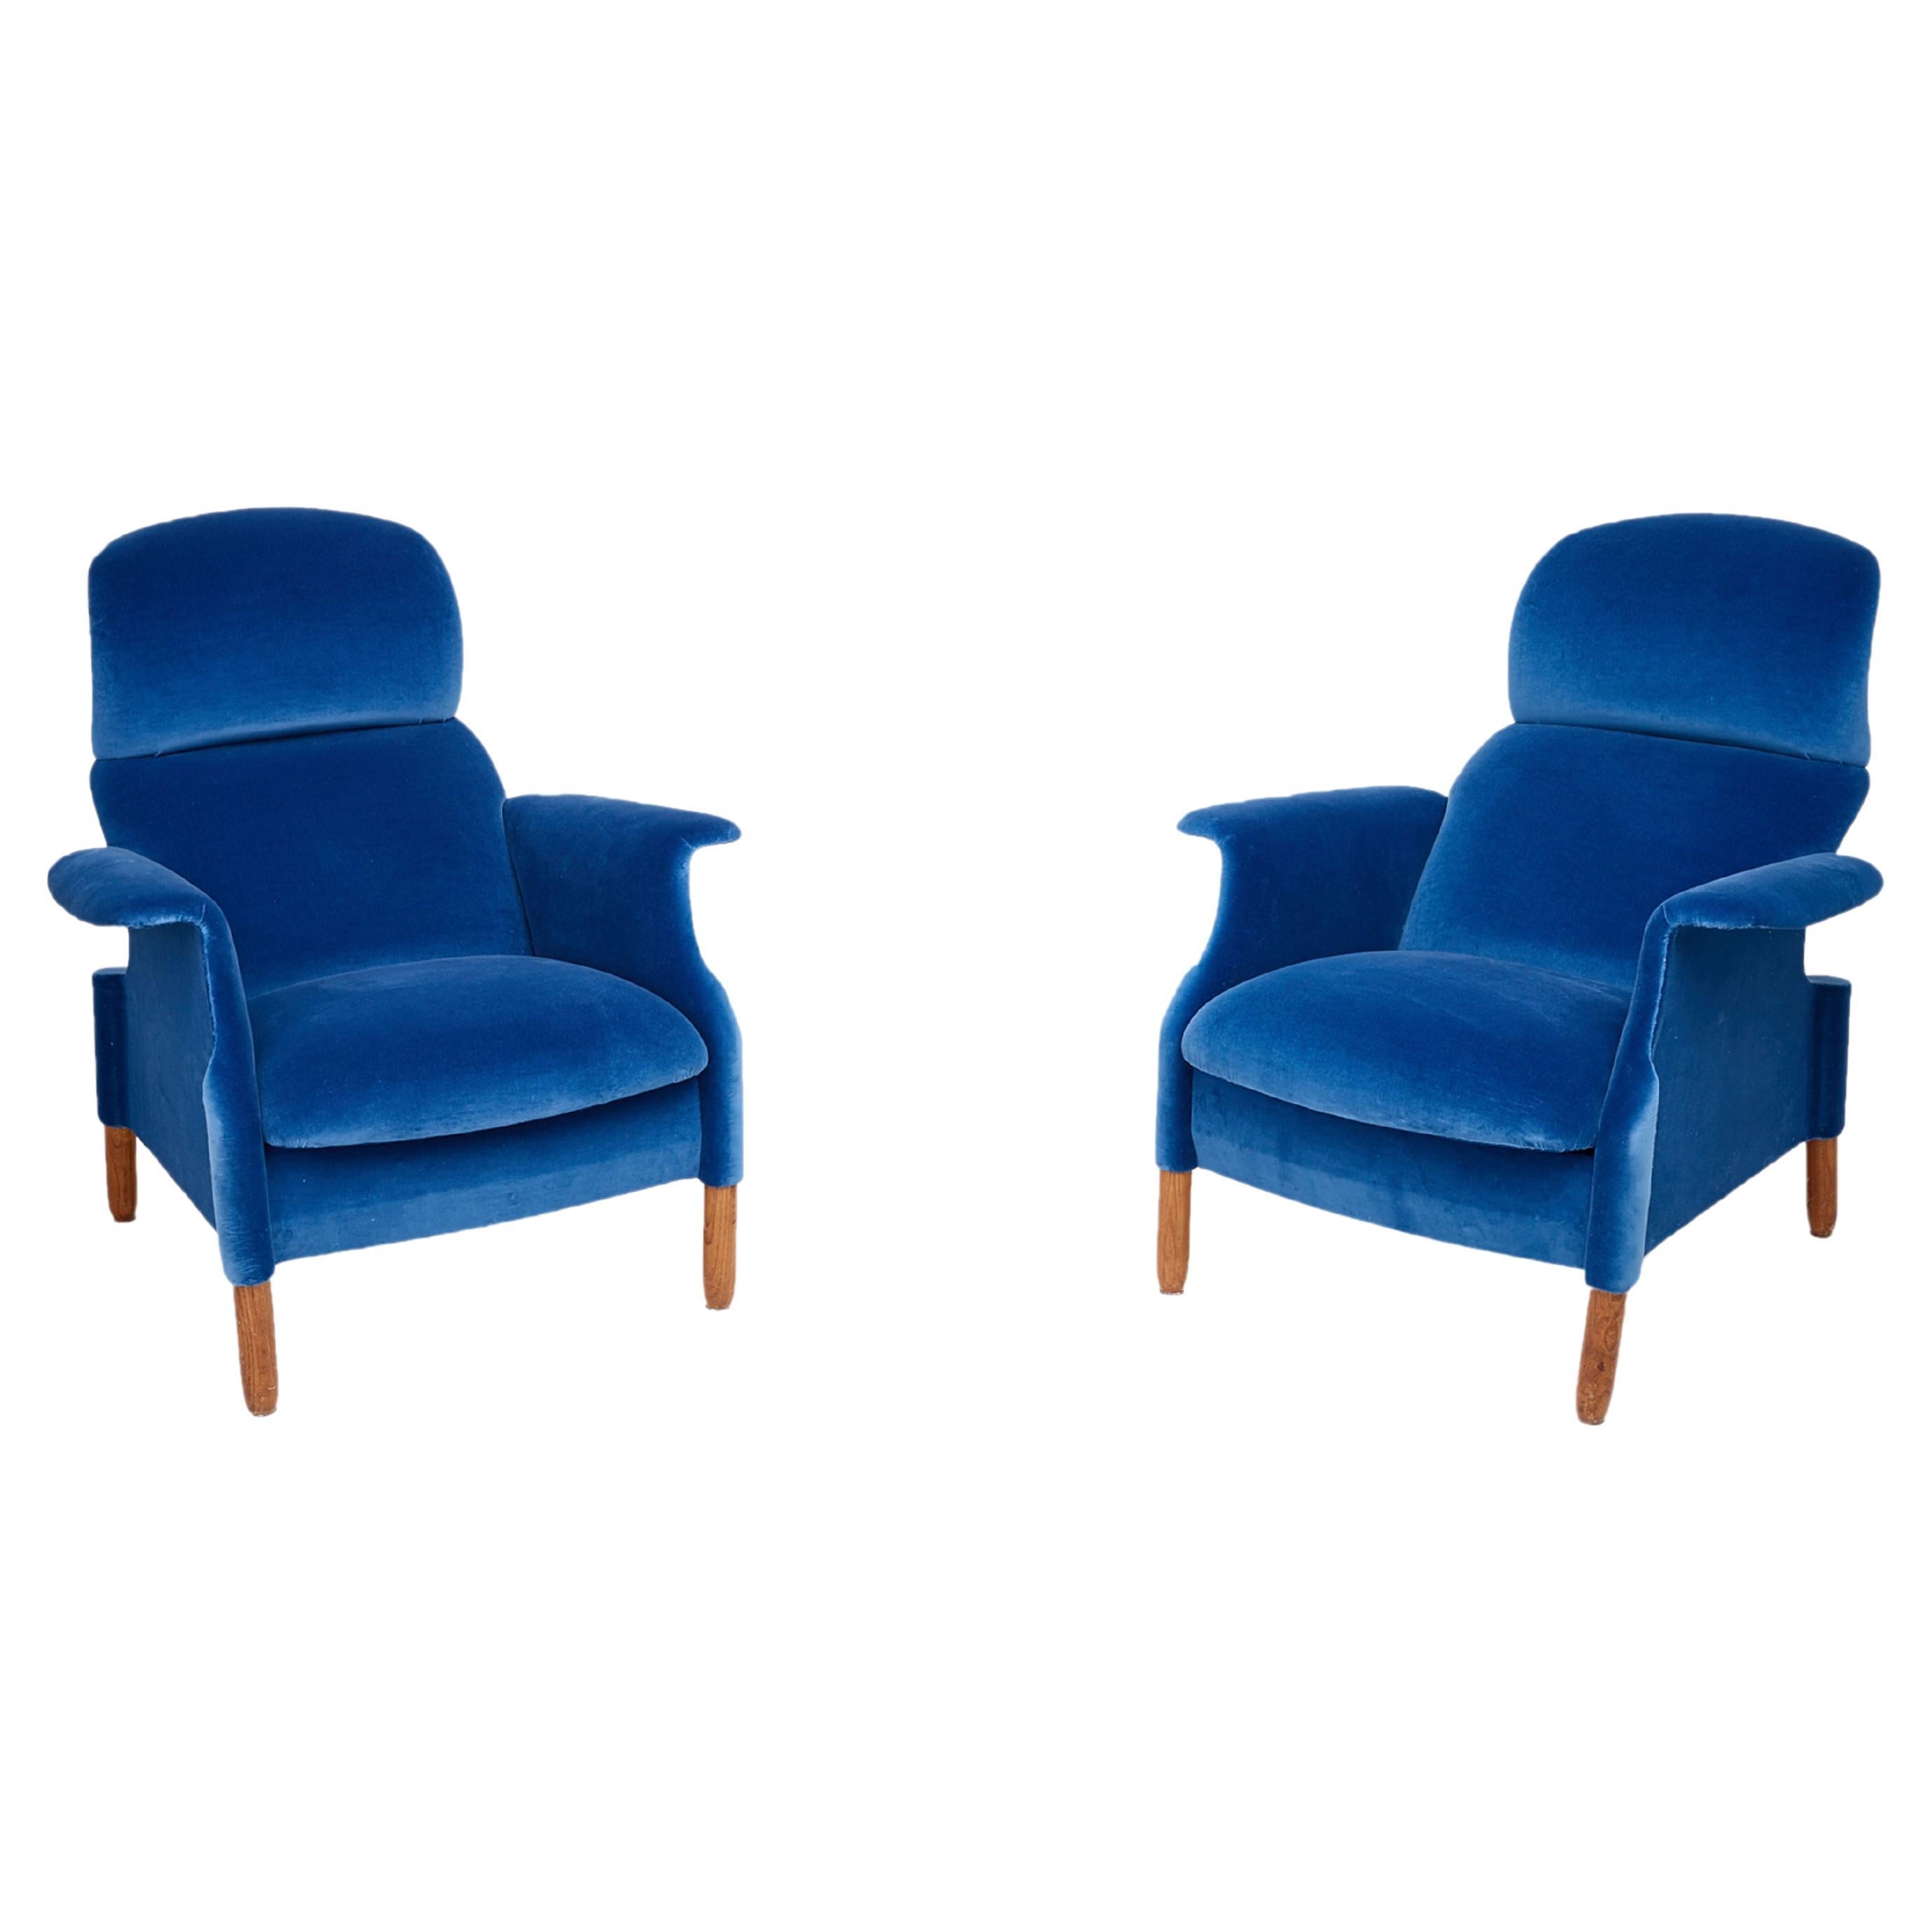 Pair of Sanluca Armchairs by Achille and Pier Giacomo Castiglioni in Blue Velvet For Sale